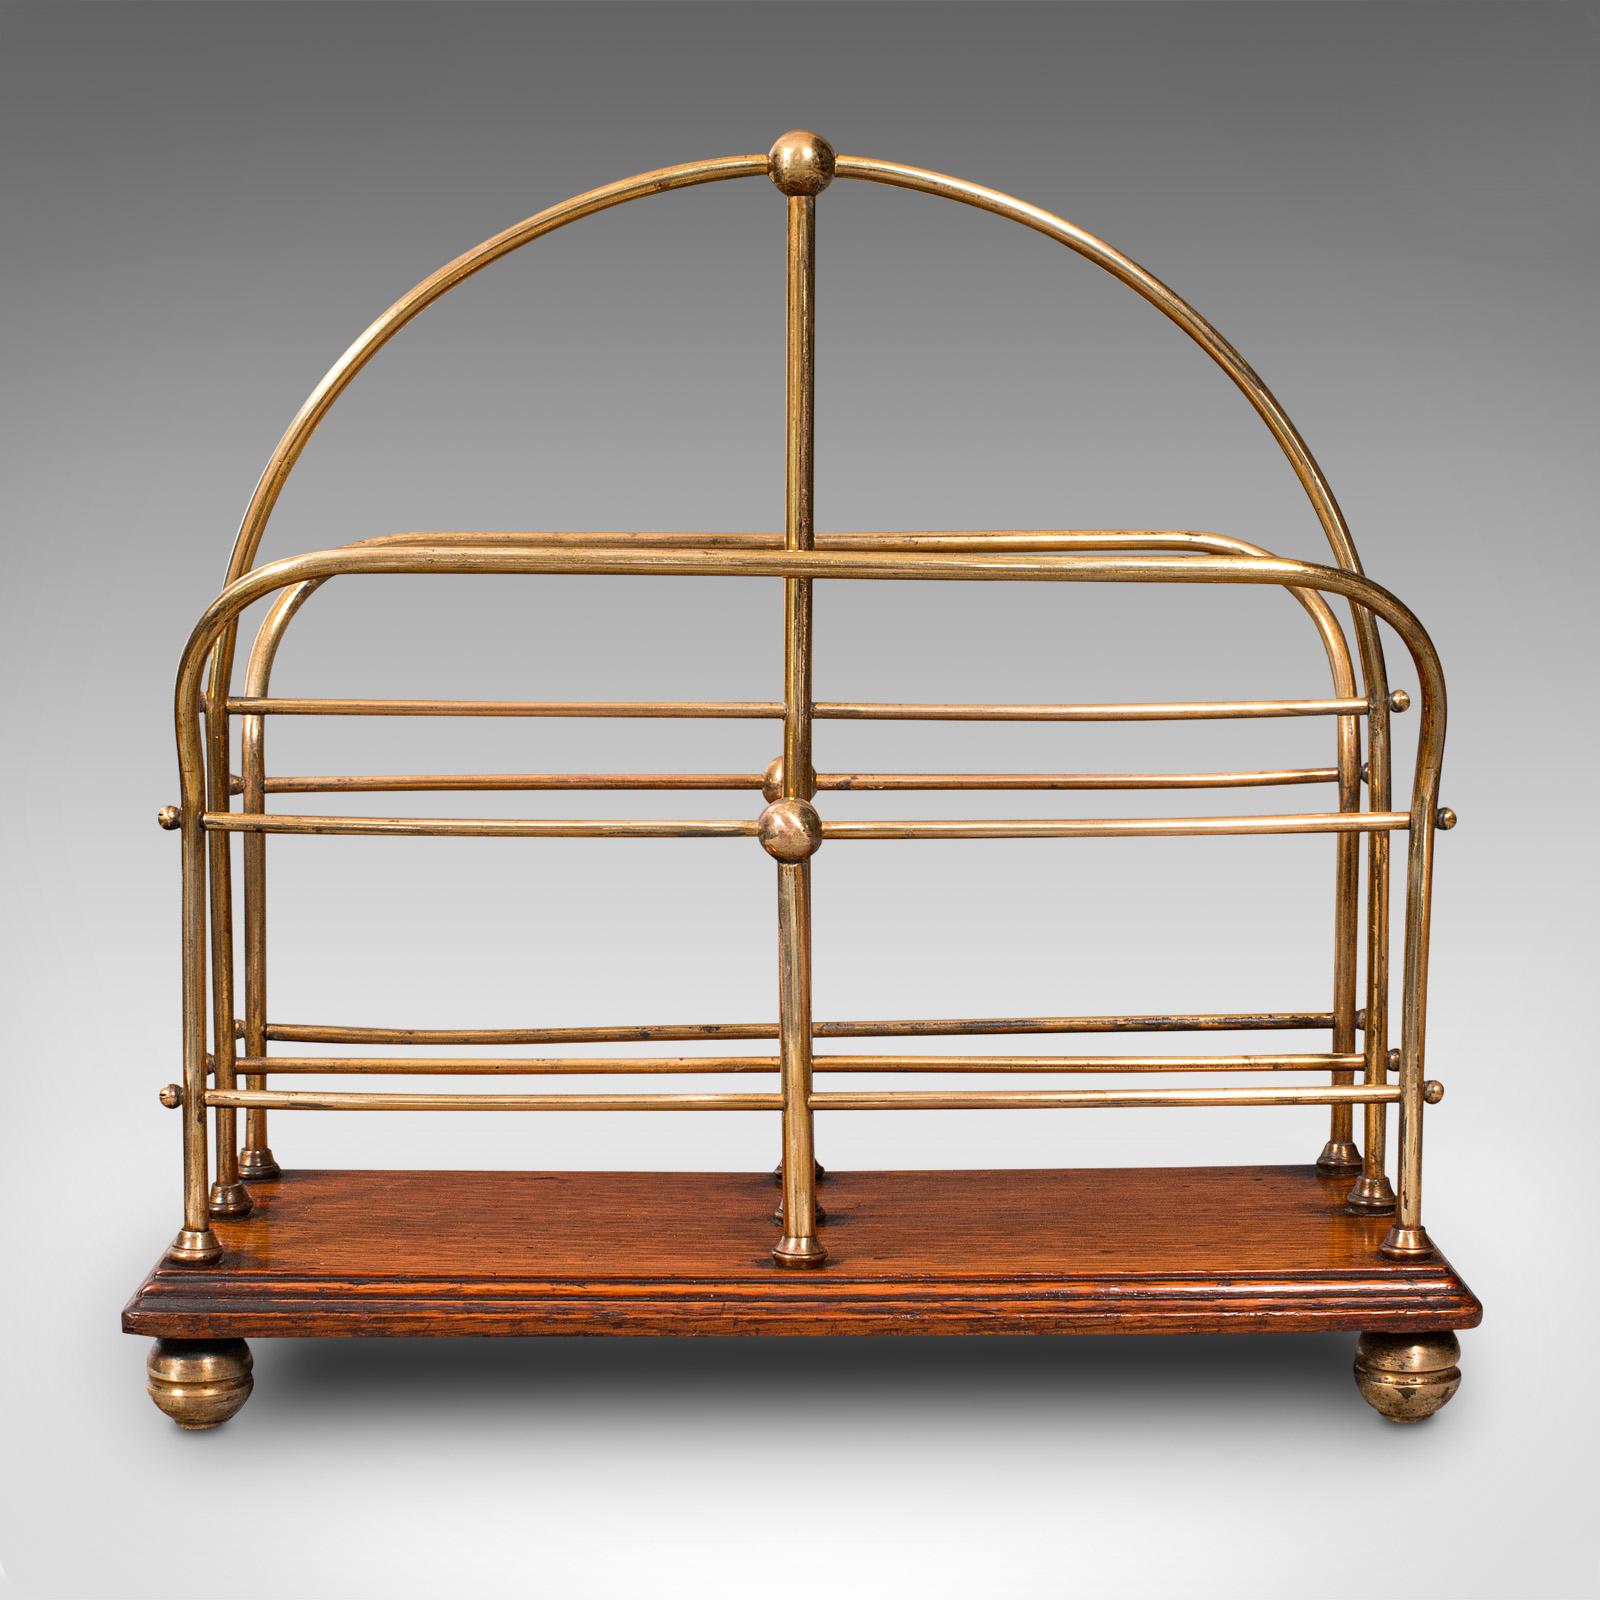 This is an antique newspaper rack. An English, oak and brass magazine or letter stand by Samuel Heath, dating to the late Victorian period, circa 1900.

Appealing Victorian stand, ideal for the morning paper or periodical
Displaying a desirable